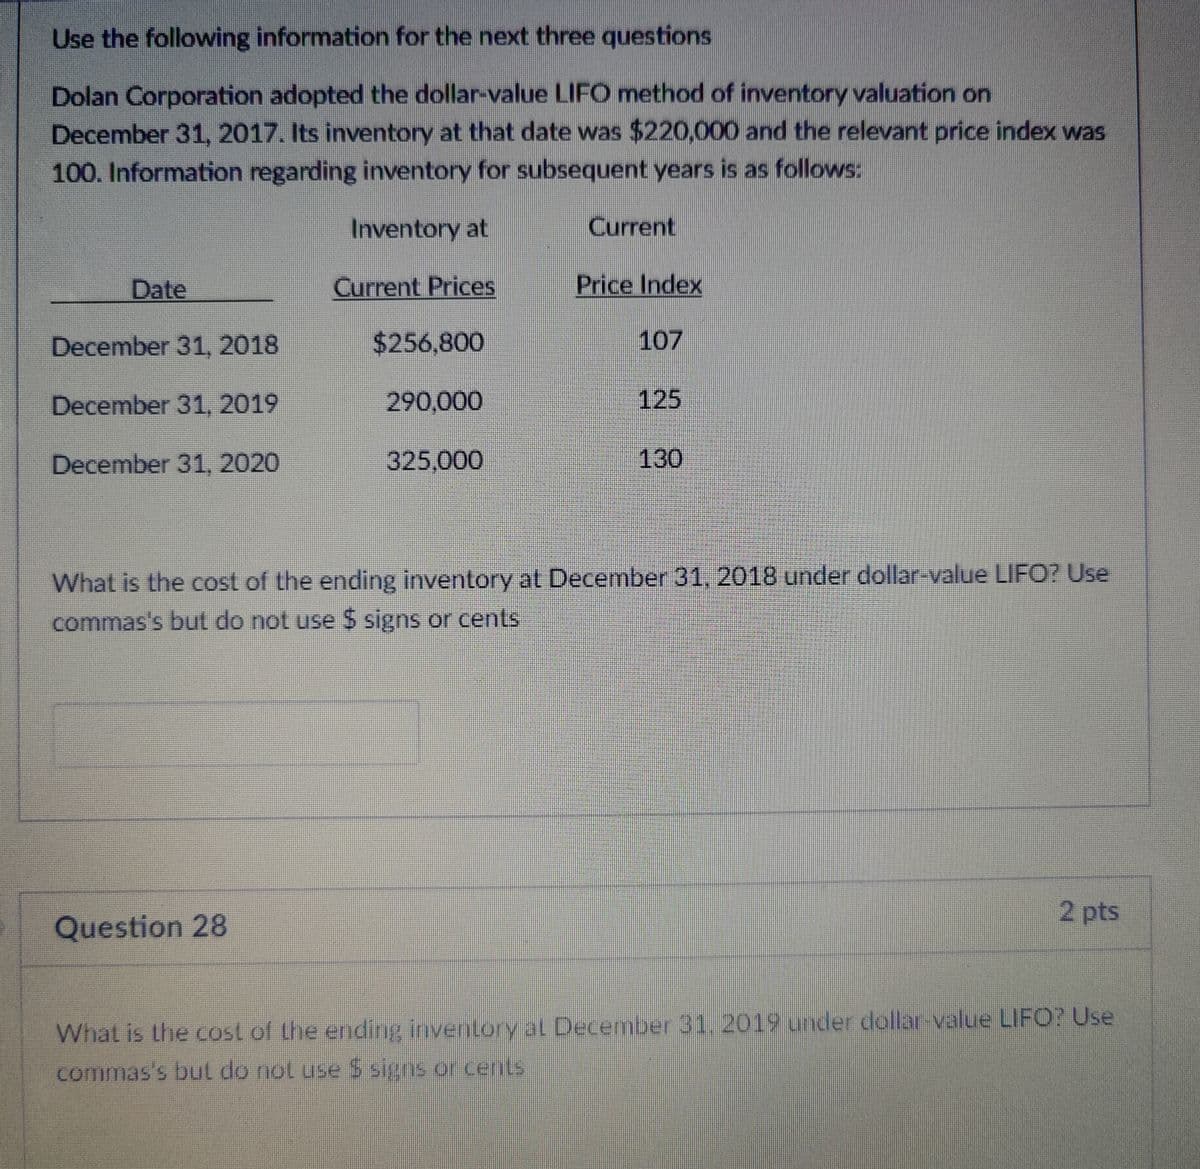 Use the following information for the next three questions
Dolan Corporation adopted the dollar-value LIFO method of inventory valuation on
December 31, 2017. Its inventory at that date was $220,000 and the relevant price index was
100. Information regarding inventory for subsequent years is as follows:
Inventory at
Current
Date
Current Prices
Price Index
December 31, 2018
$256,800
107
December 31, 2019
290,000
125
December 31, 2020
325,000
130
What is the cost of the ending inventory at December 31, 2018 under dollar-value LIFO? Use
commas's but do not use $ signs or cents
Question 28
2 pts
What is the cost of the ending inventory at December 31, 2019 under dollar-value LIFO? Use
commas's but do not use $ signs or cents